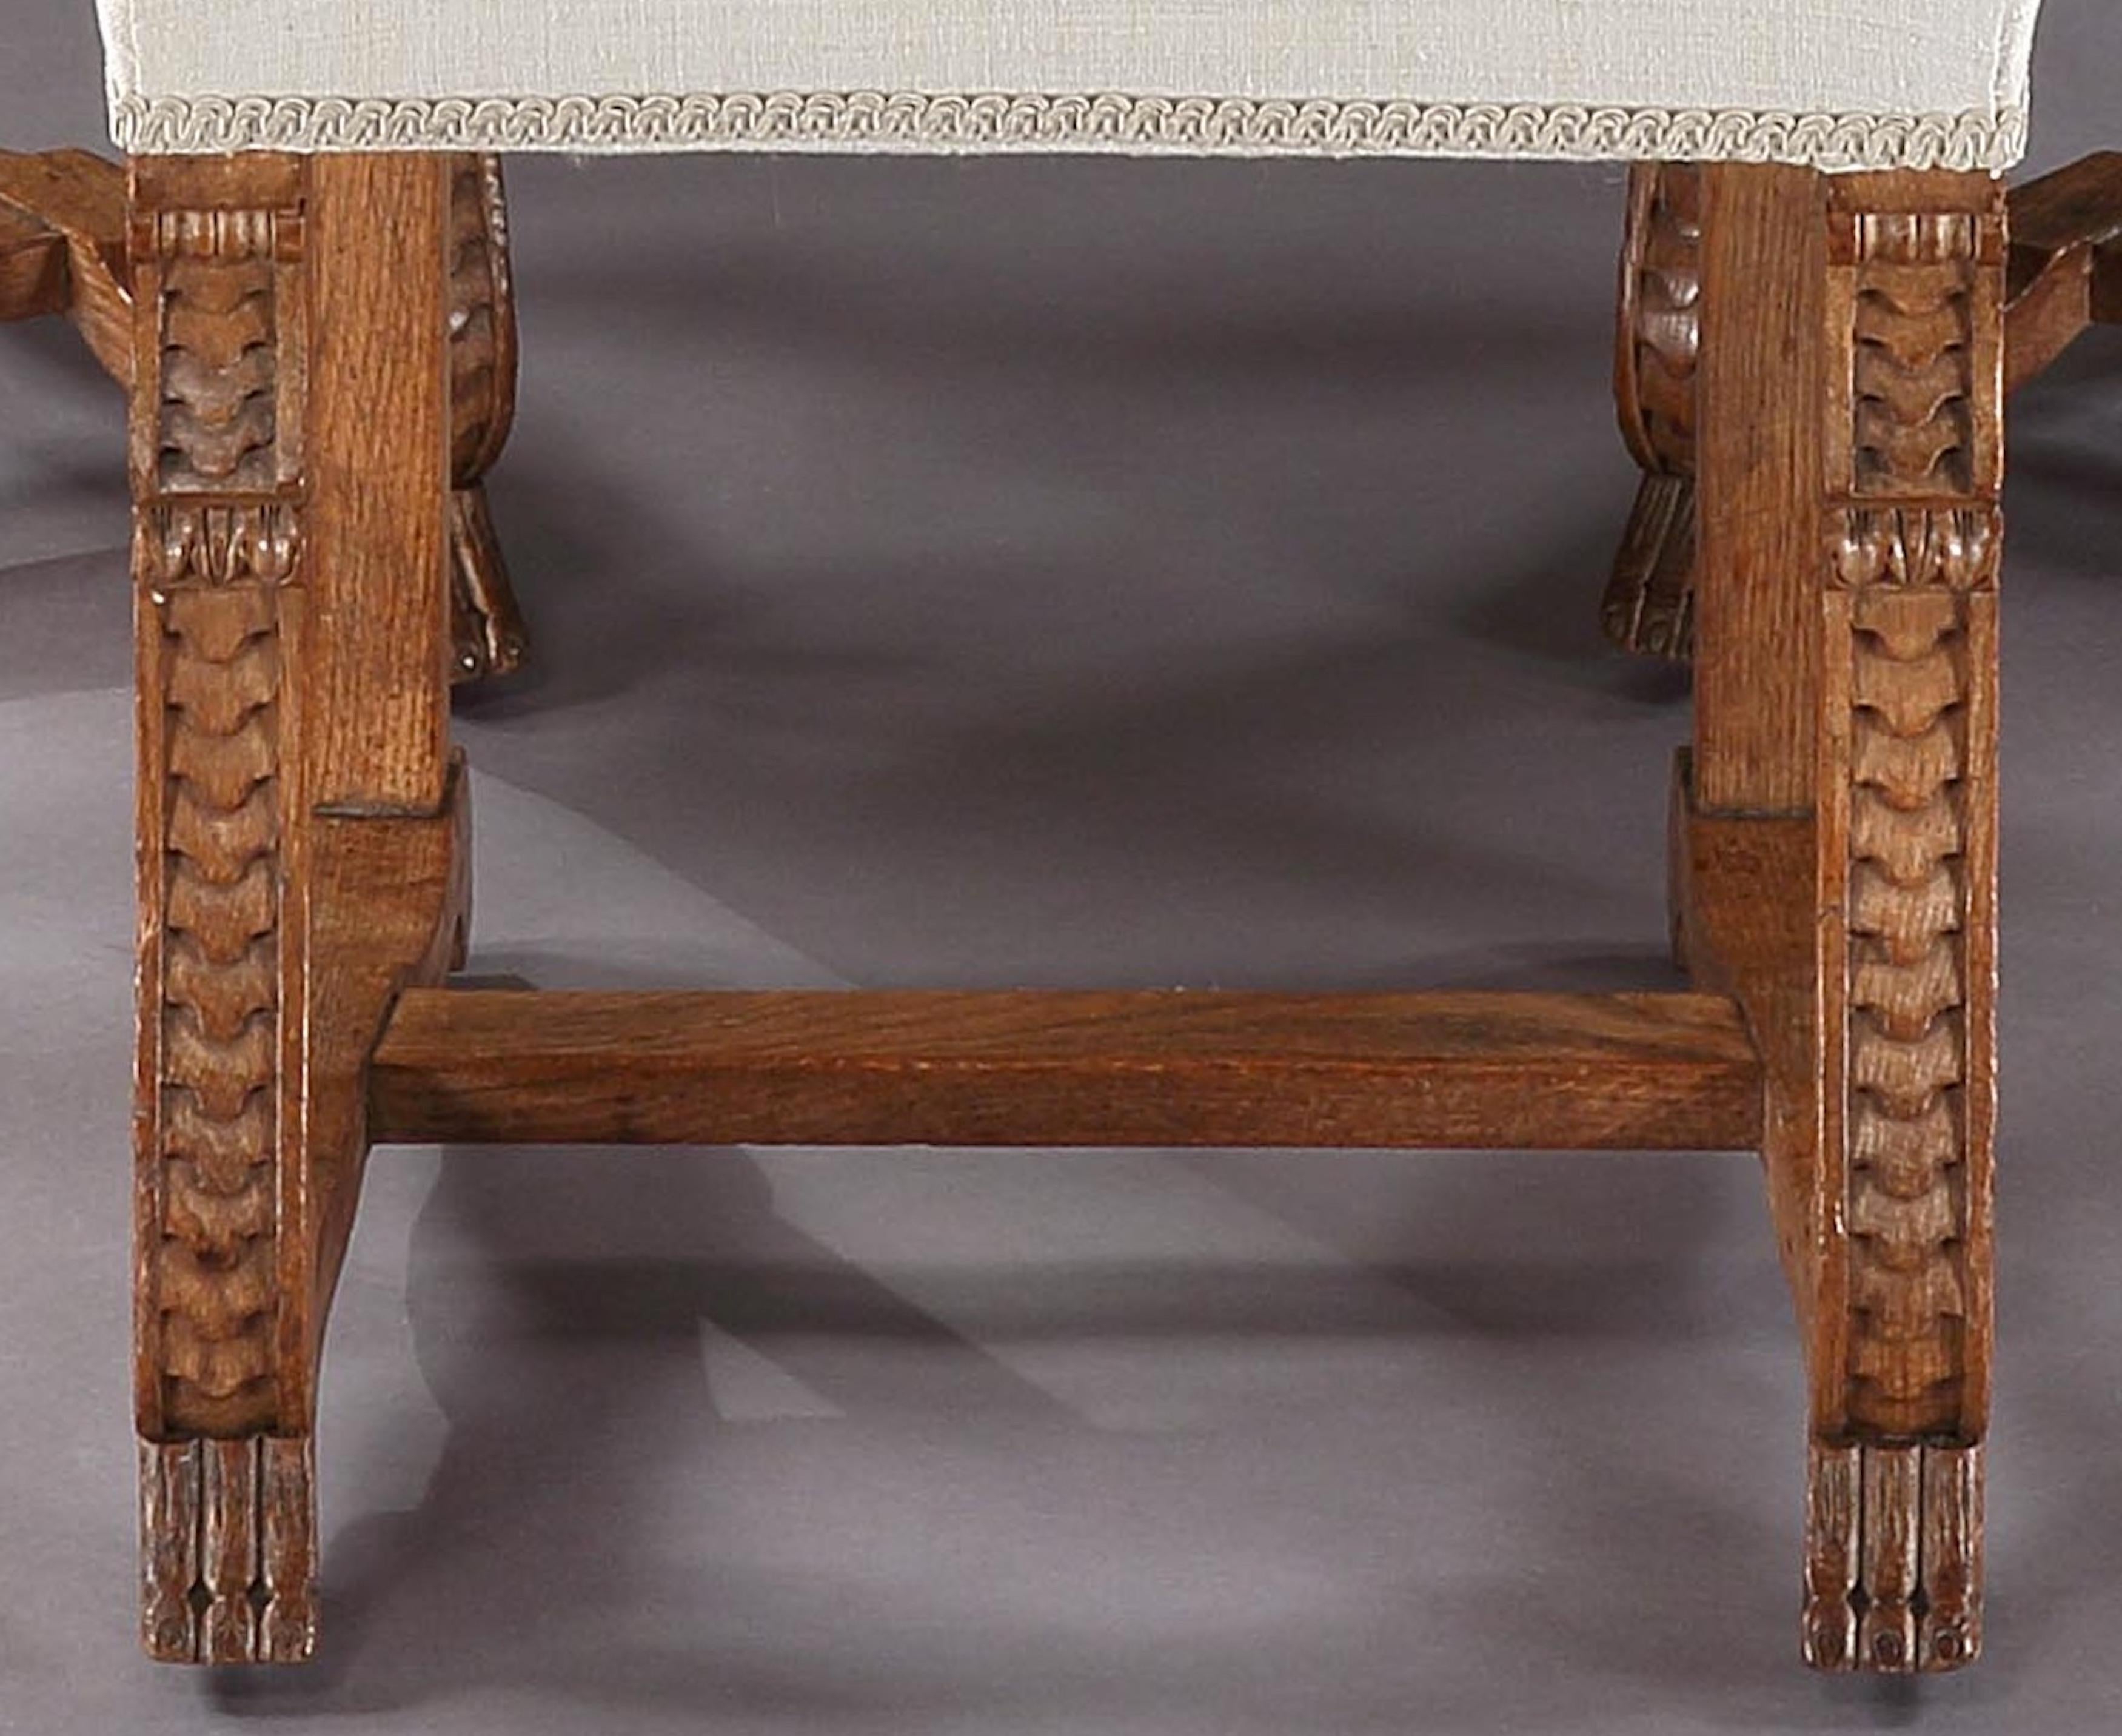 Chair, Upholstered, Dining, Set, Eight, 19th Century, French, Oak, Provincial im Zustand „Gut“ in BUNGAY, SUFFOLK